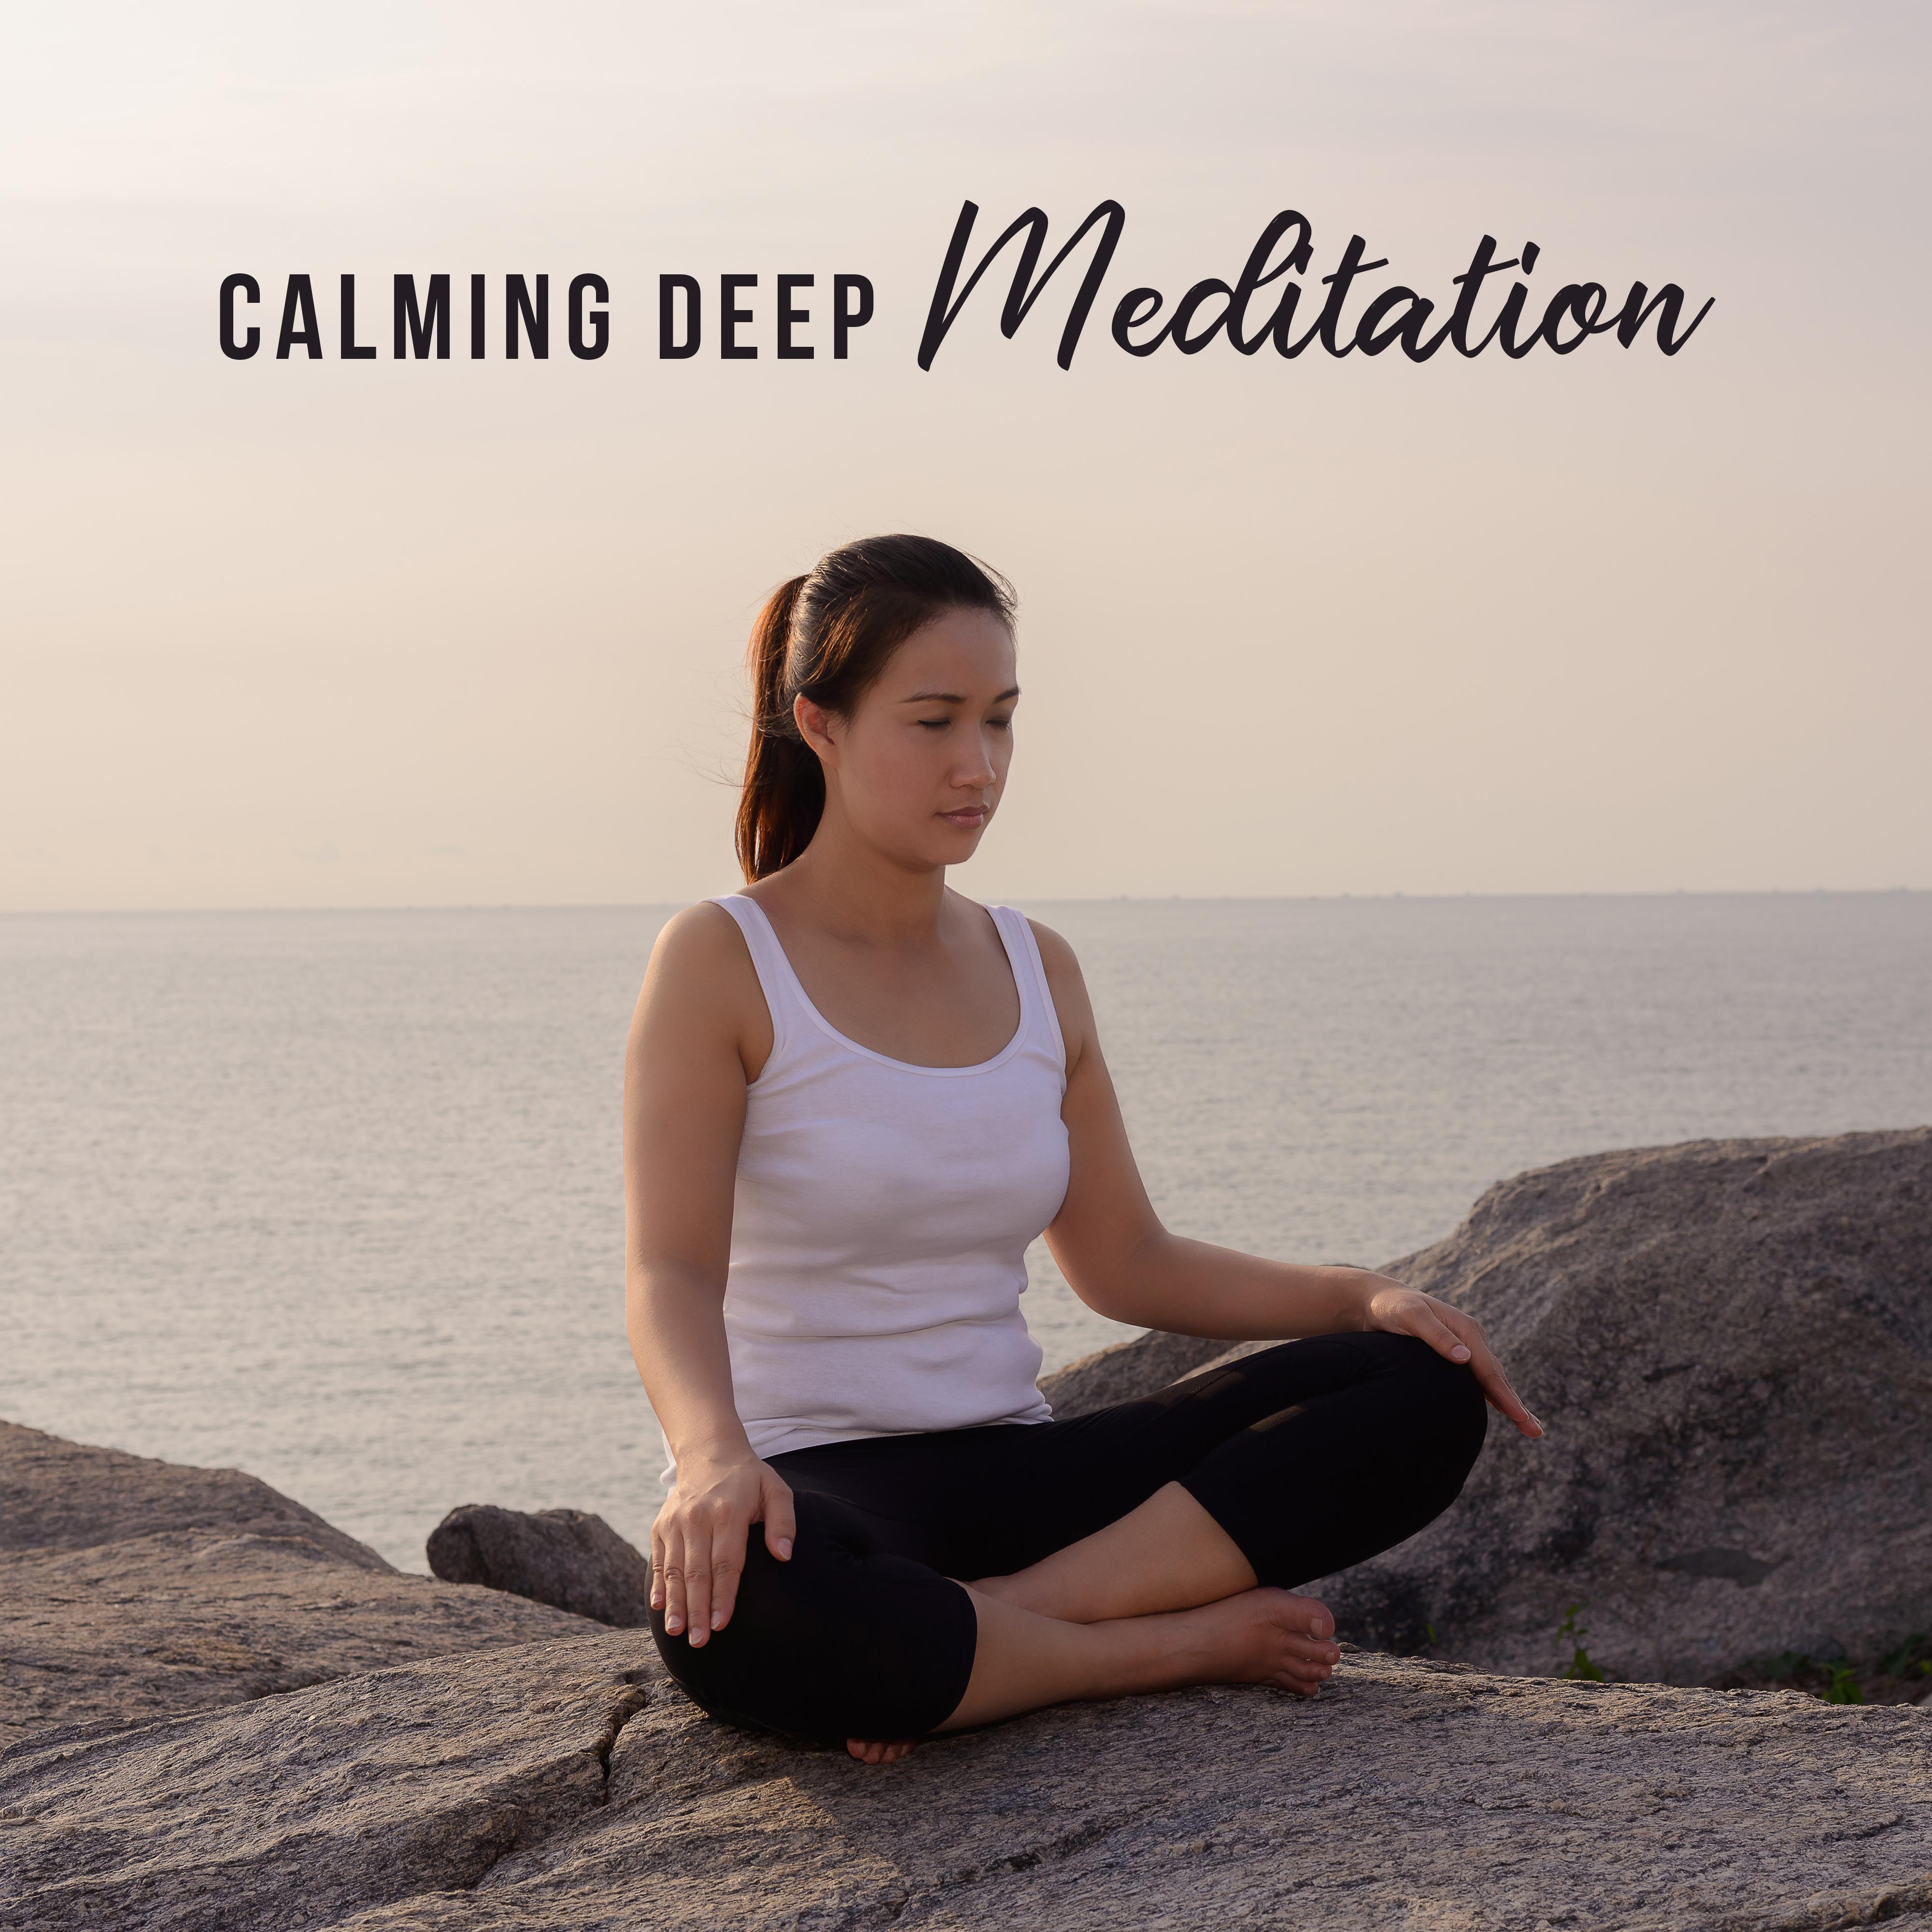 Calming Deep Meditation – Meditation Music Zone, Zen Serenity, Meditation Therapy for Pure Mind, Peaceful Melodies for Yoga, Yoga Training, Lounge